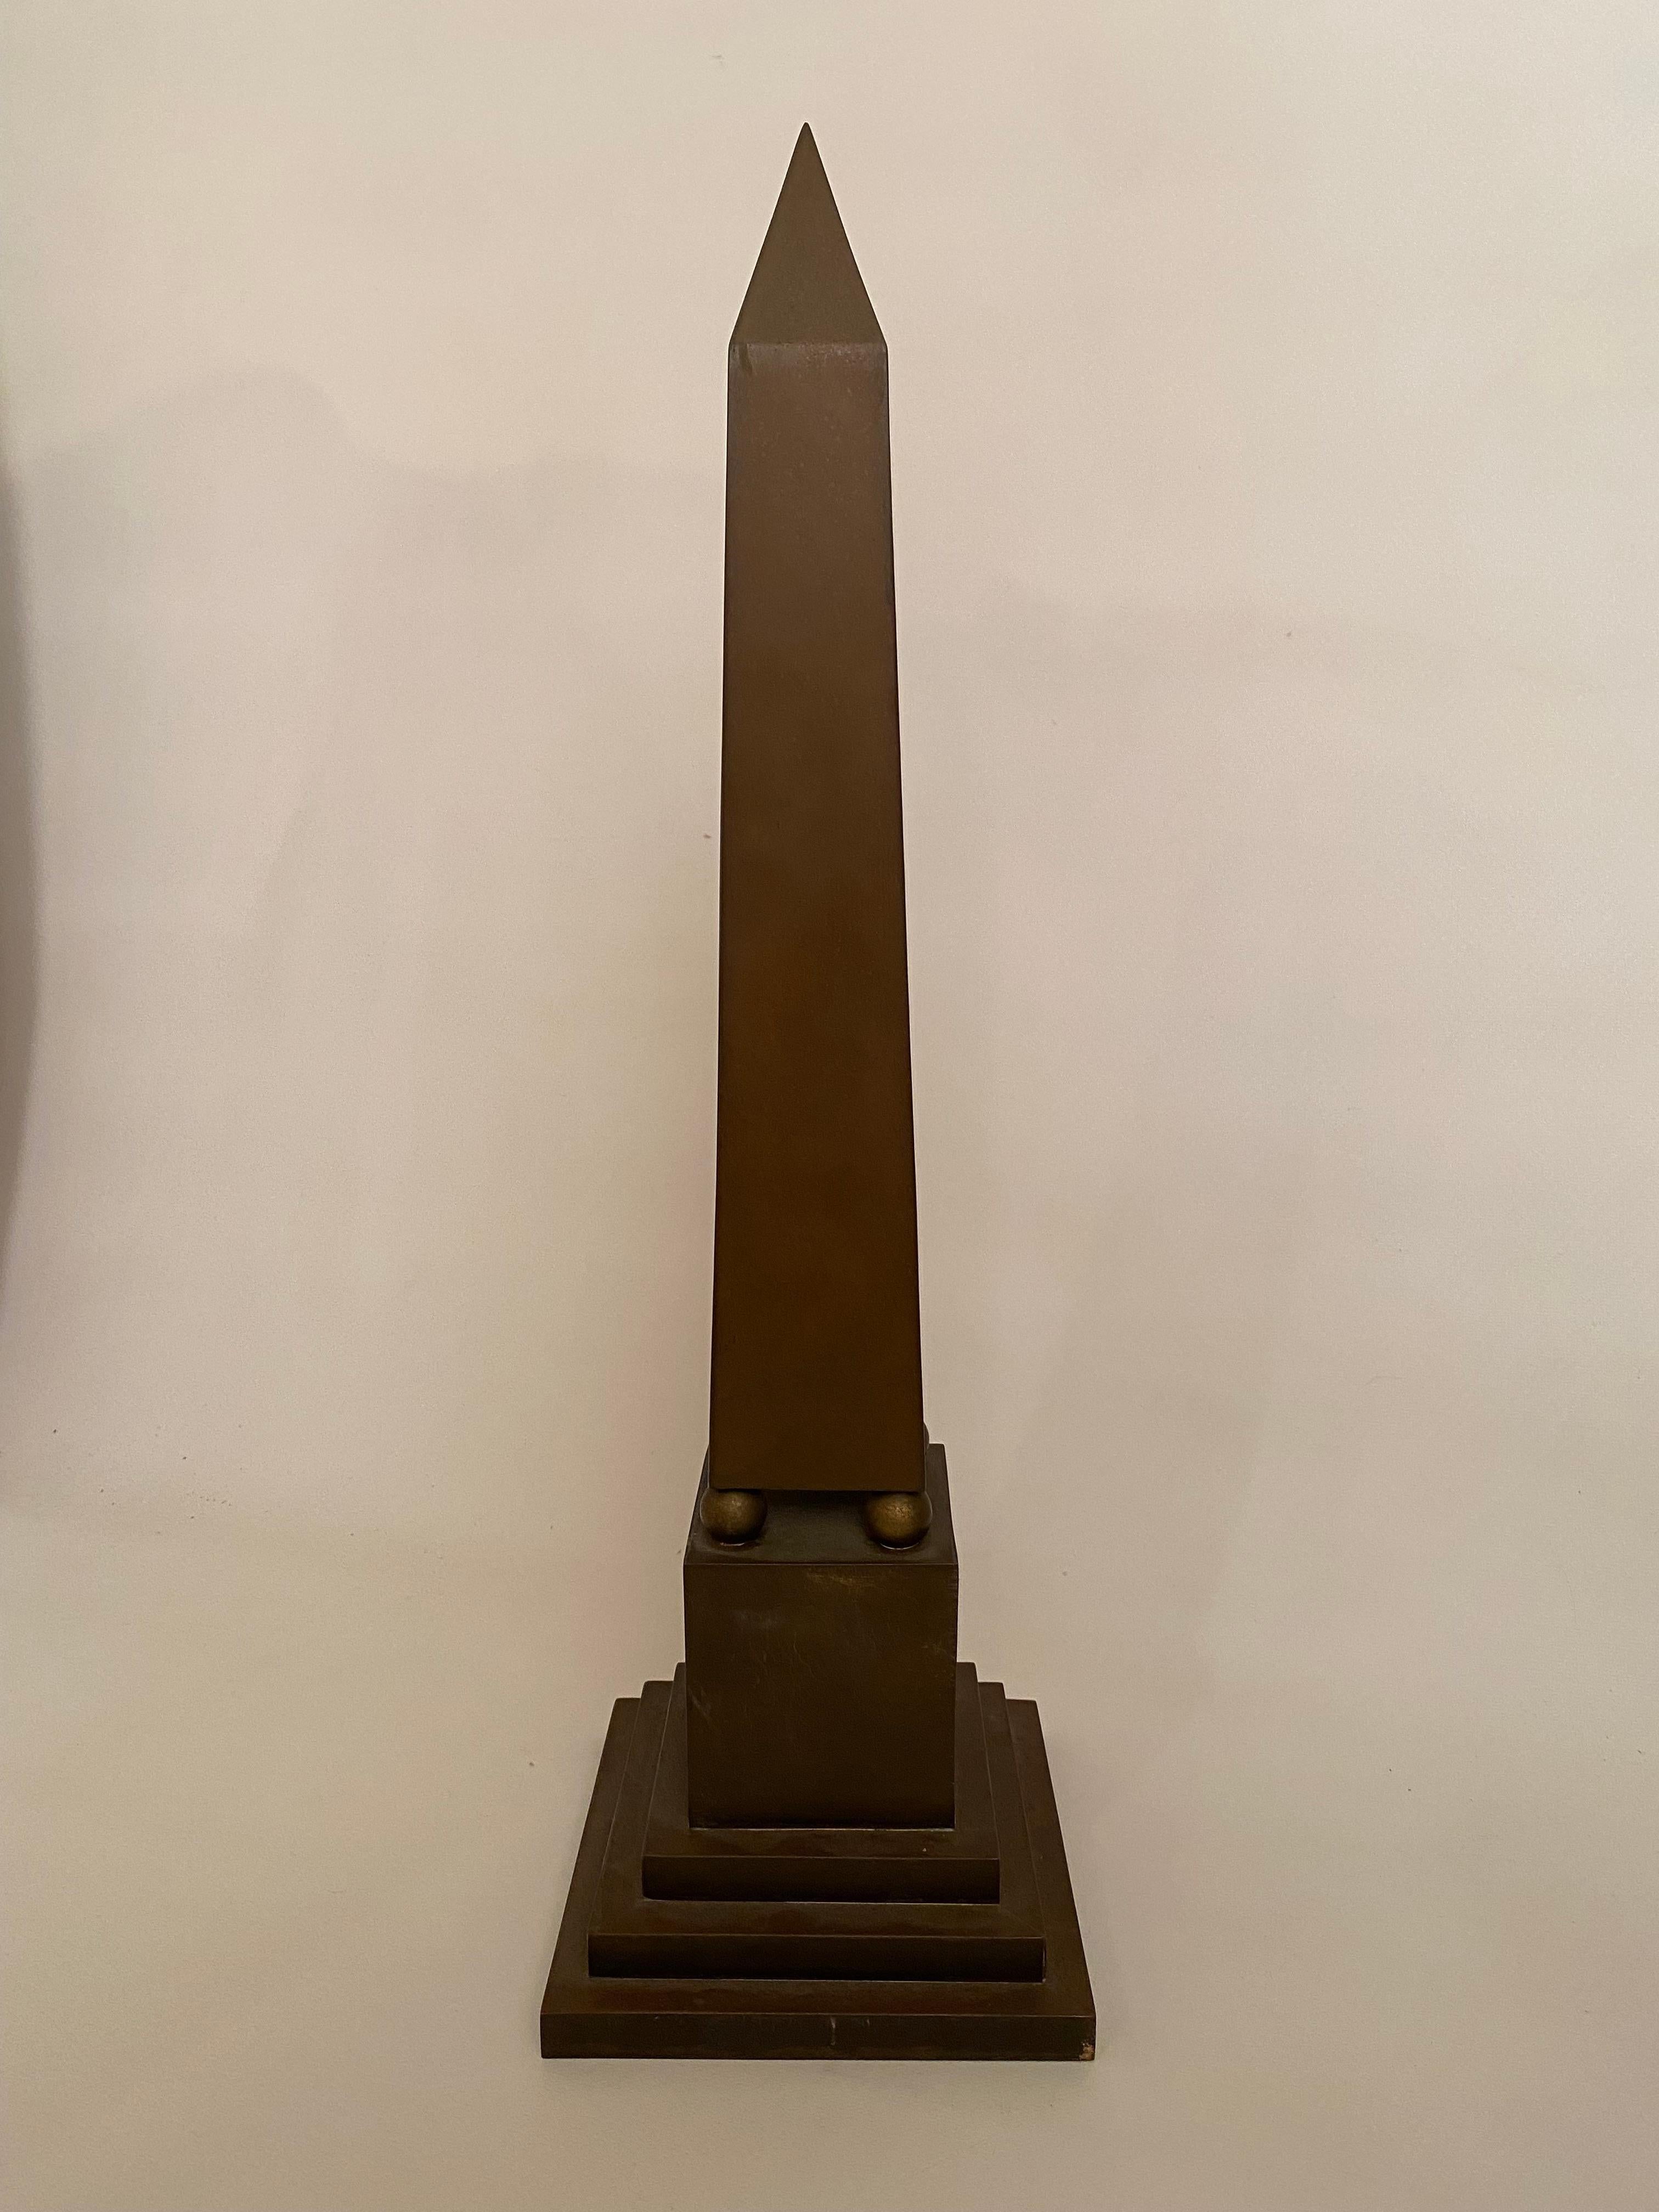 Large Italian brass obelisk. Stamped, Made In Italy on the underside. Circa 1960-70. Good condition with overall dark patina and tarnish. Wear and minor scratches commensurate with age and use. Structurally sound.

Approximately 20.25